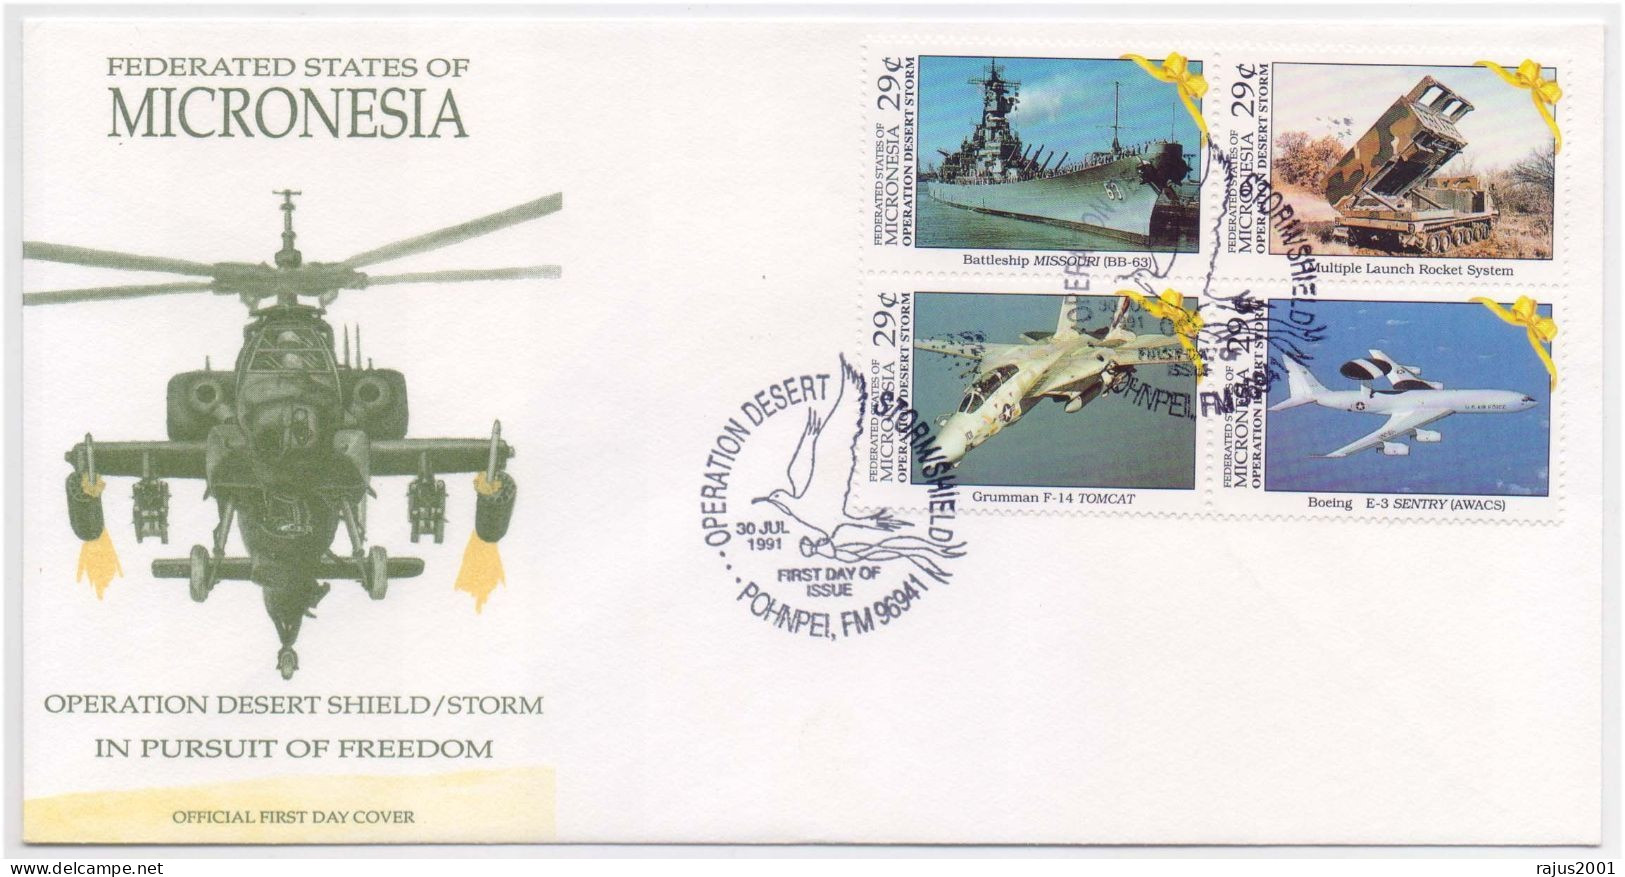 Operation Desert Shield Storm, Fighter Plane, Lockheed Stealth Bomber, Apache Helicopter, Peace, Bird, Micronesia FDC - Elicotteri